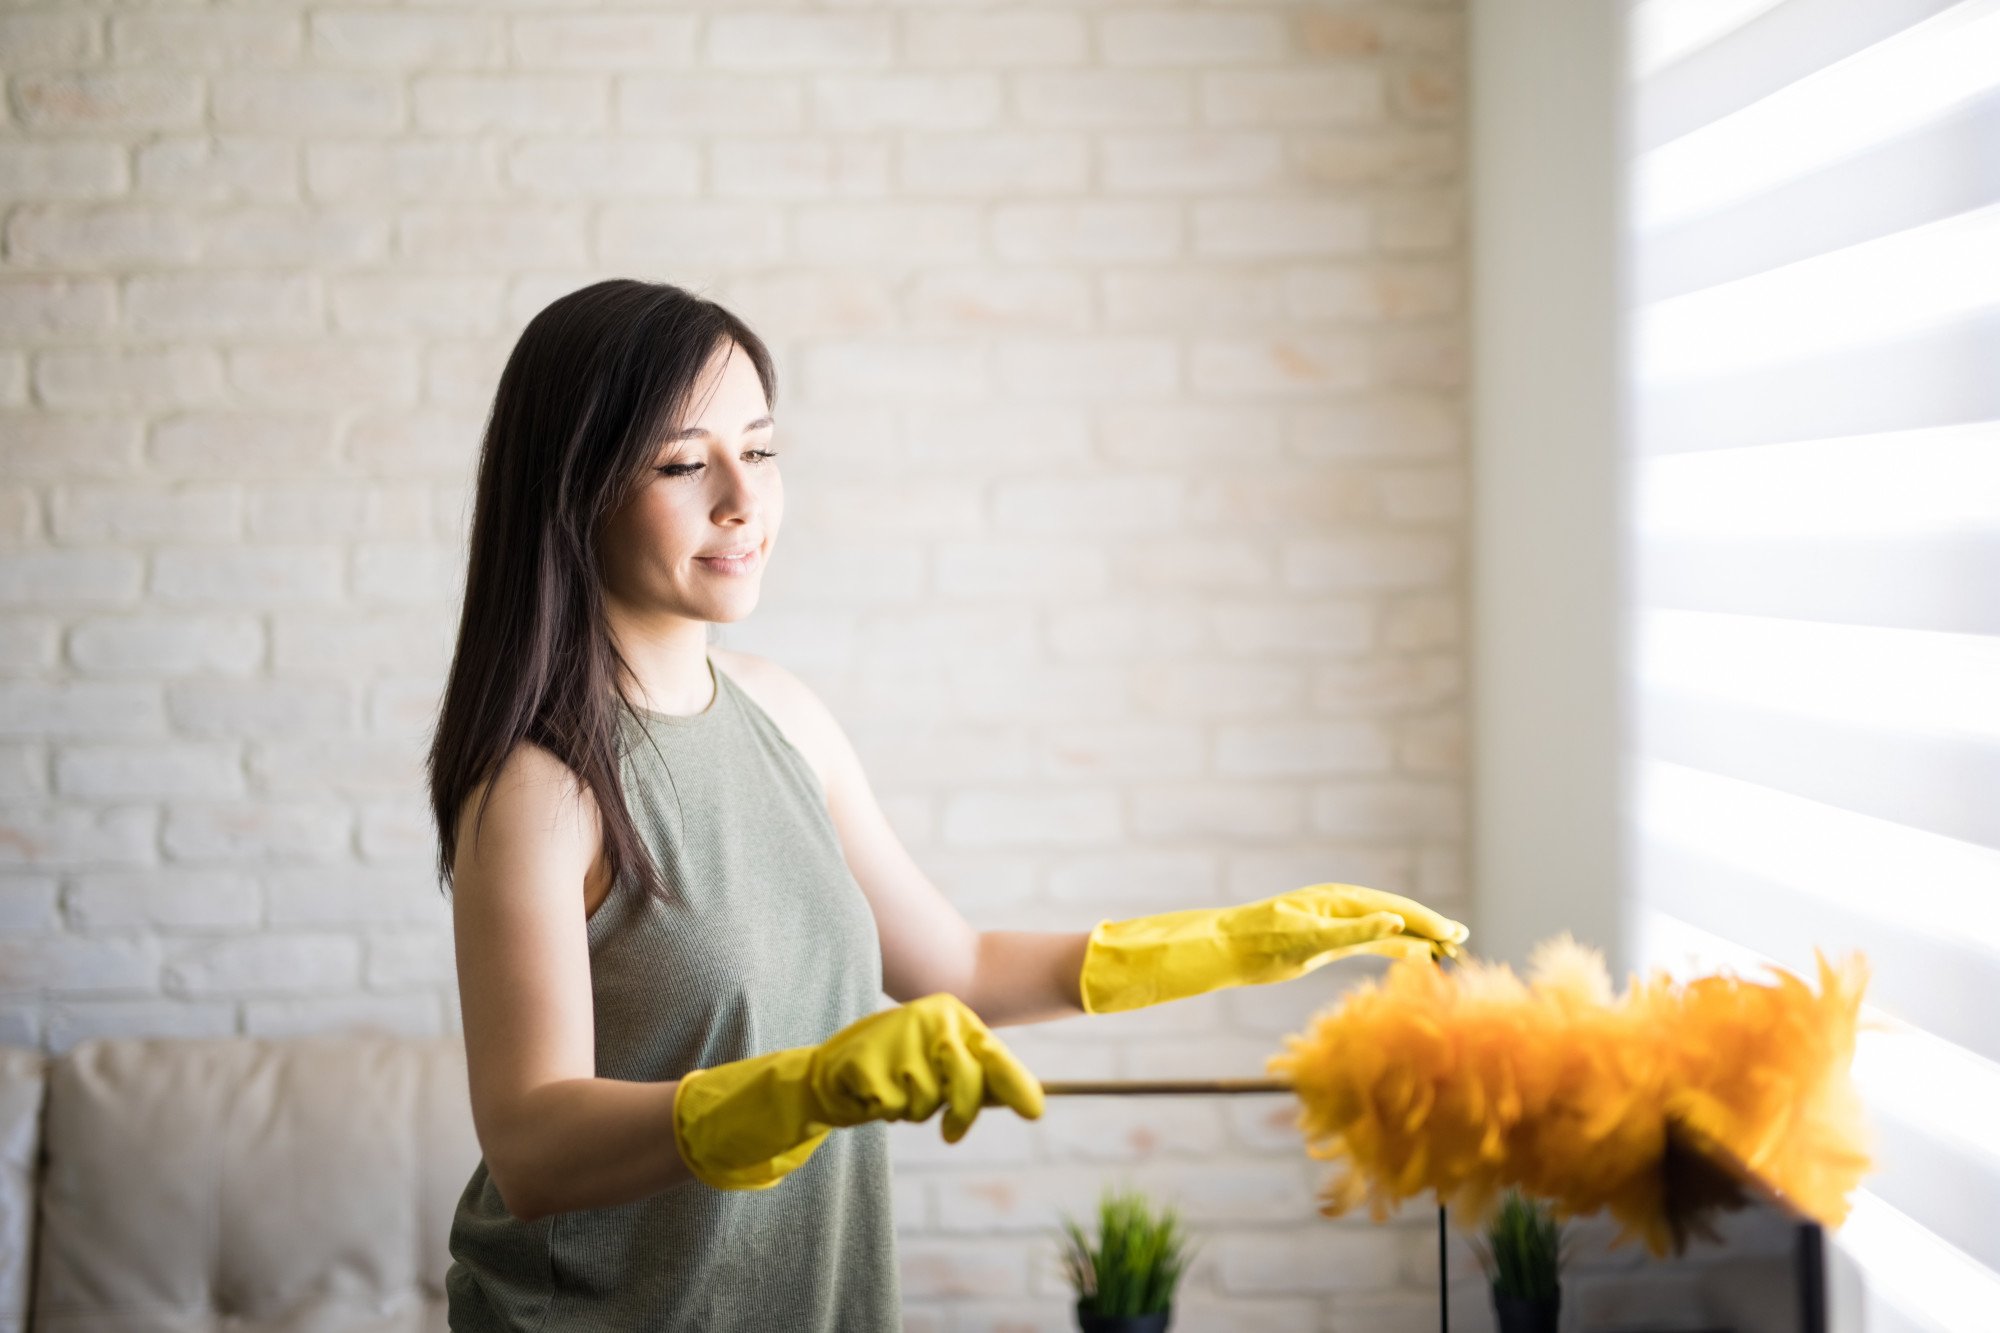 Should you dust your house every day? How often should you dust your house? Click here to learn everything you need to know.